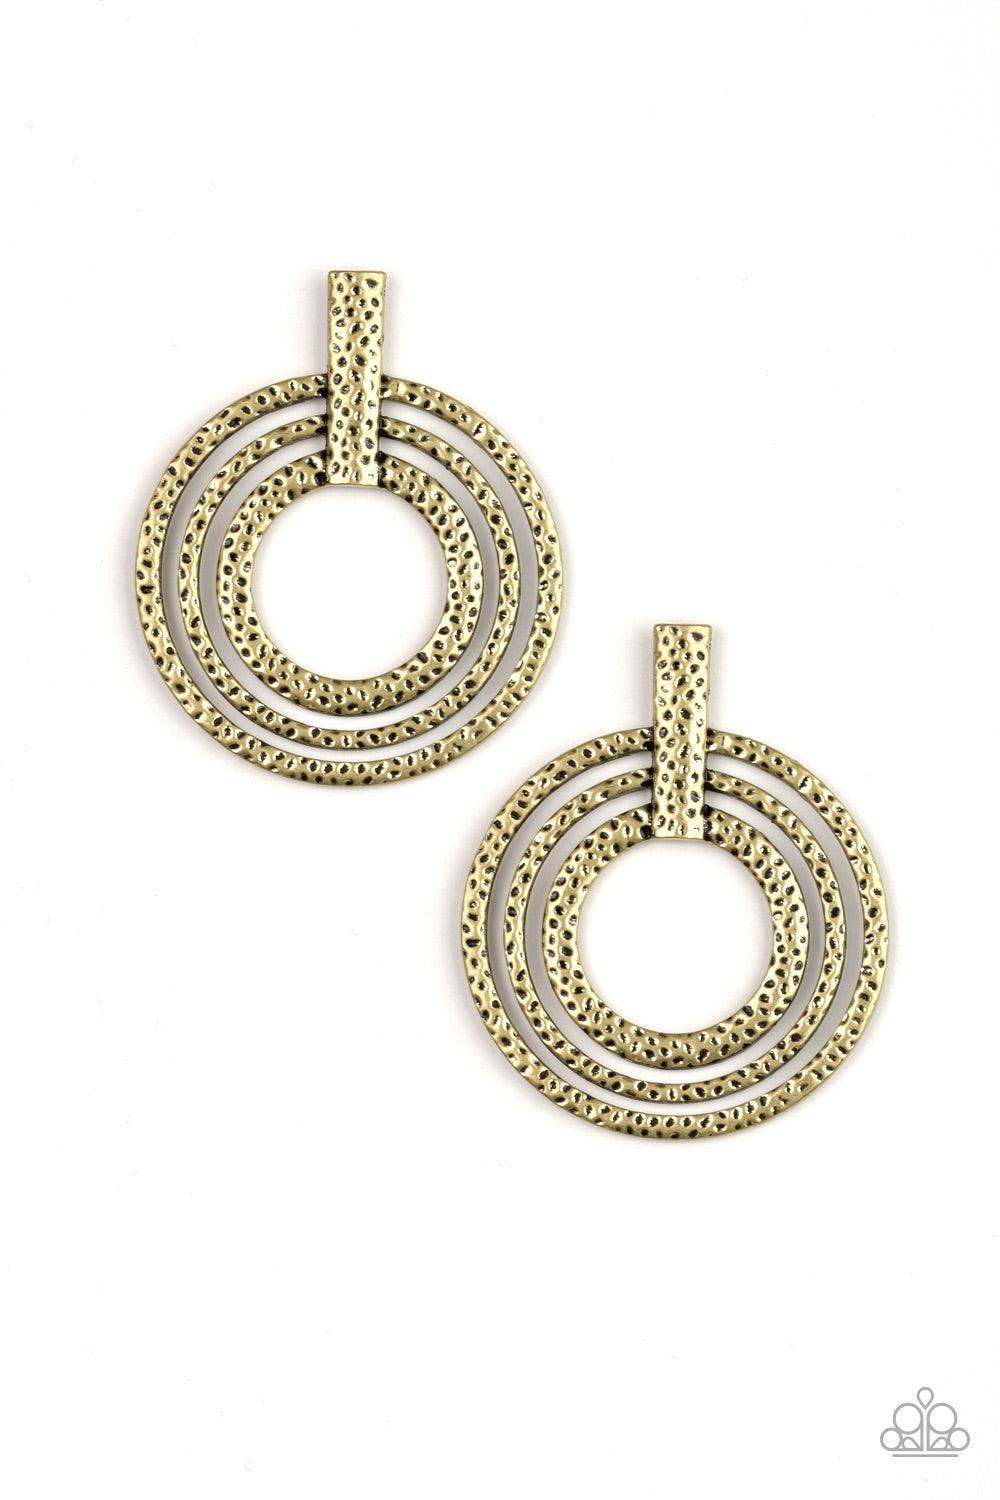 Paparazzi Accessories Ever Elliptical - Brass Delicately hammered in an antiqued shimmer, glistening brass circles attach to a rectangular brass fitting, spiraling into a dizzying frame. Features a standard post fitting. Jewelry